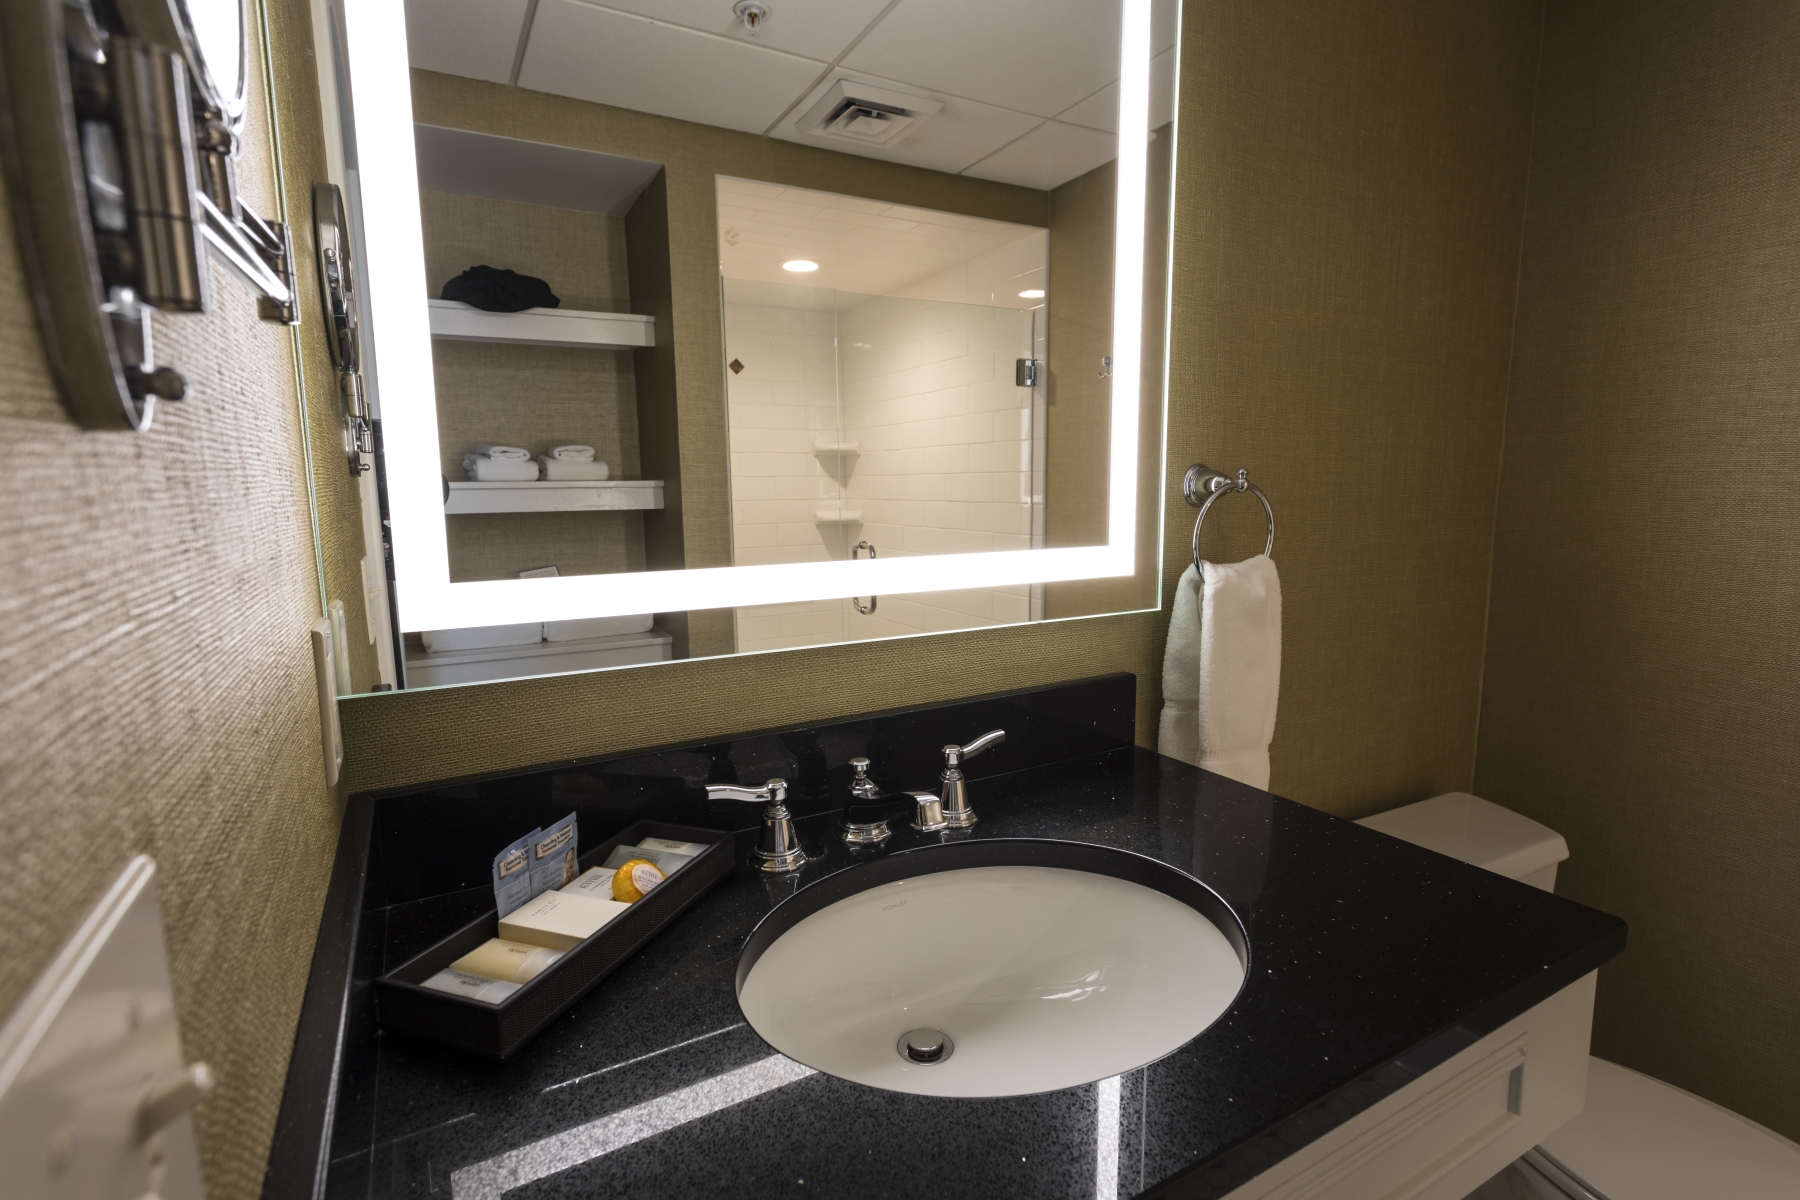 bathroom mirror with lights on around the edge and black counter top